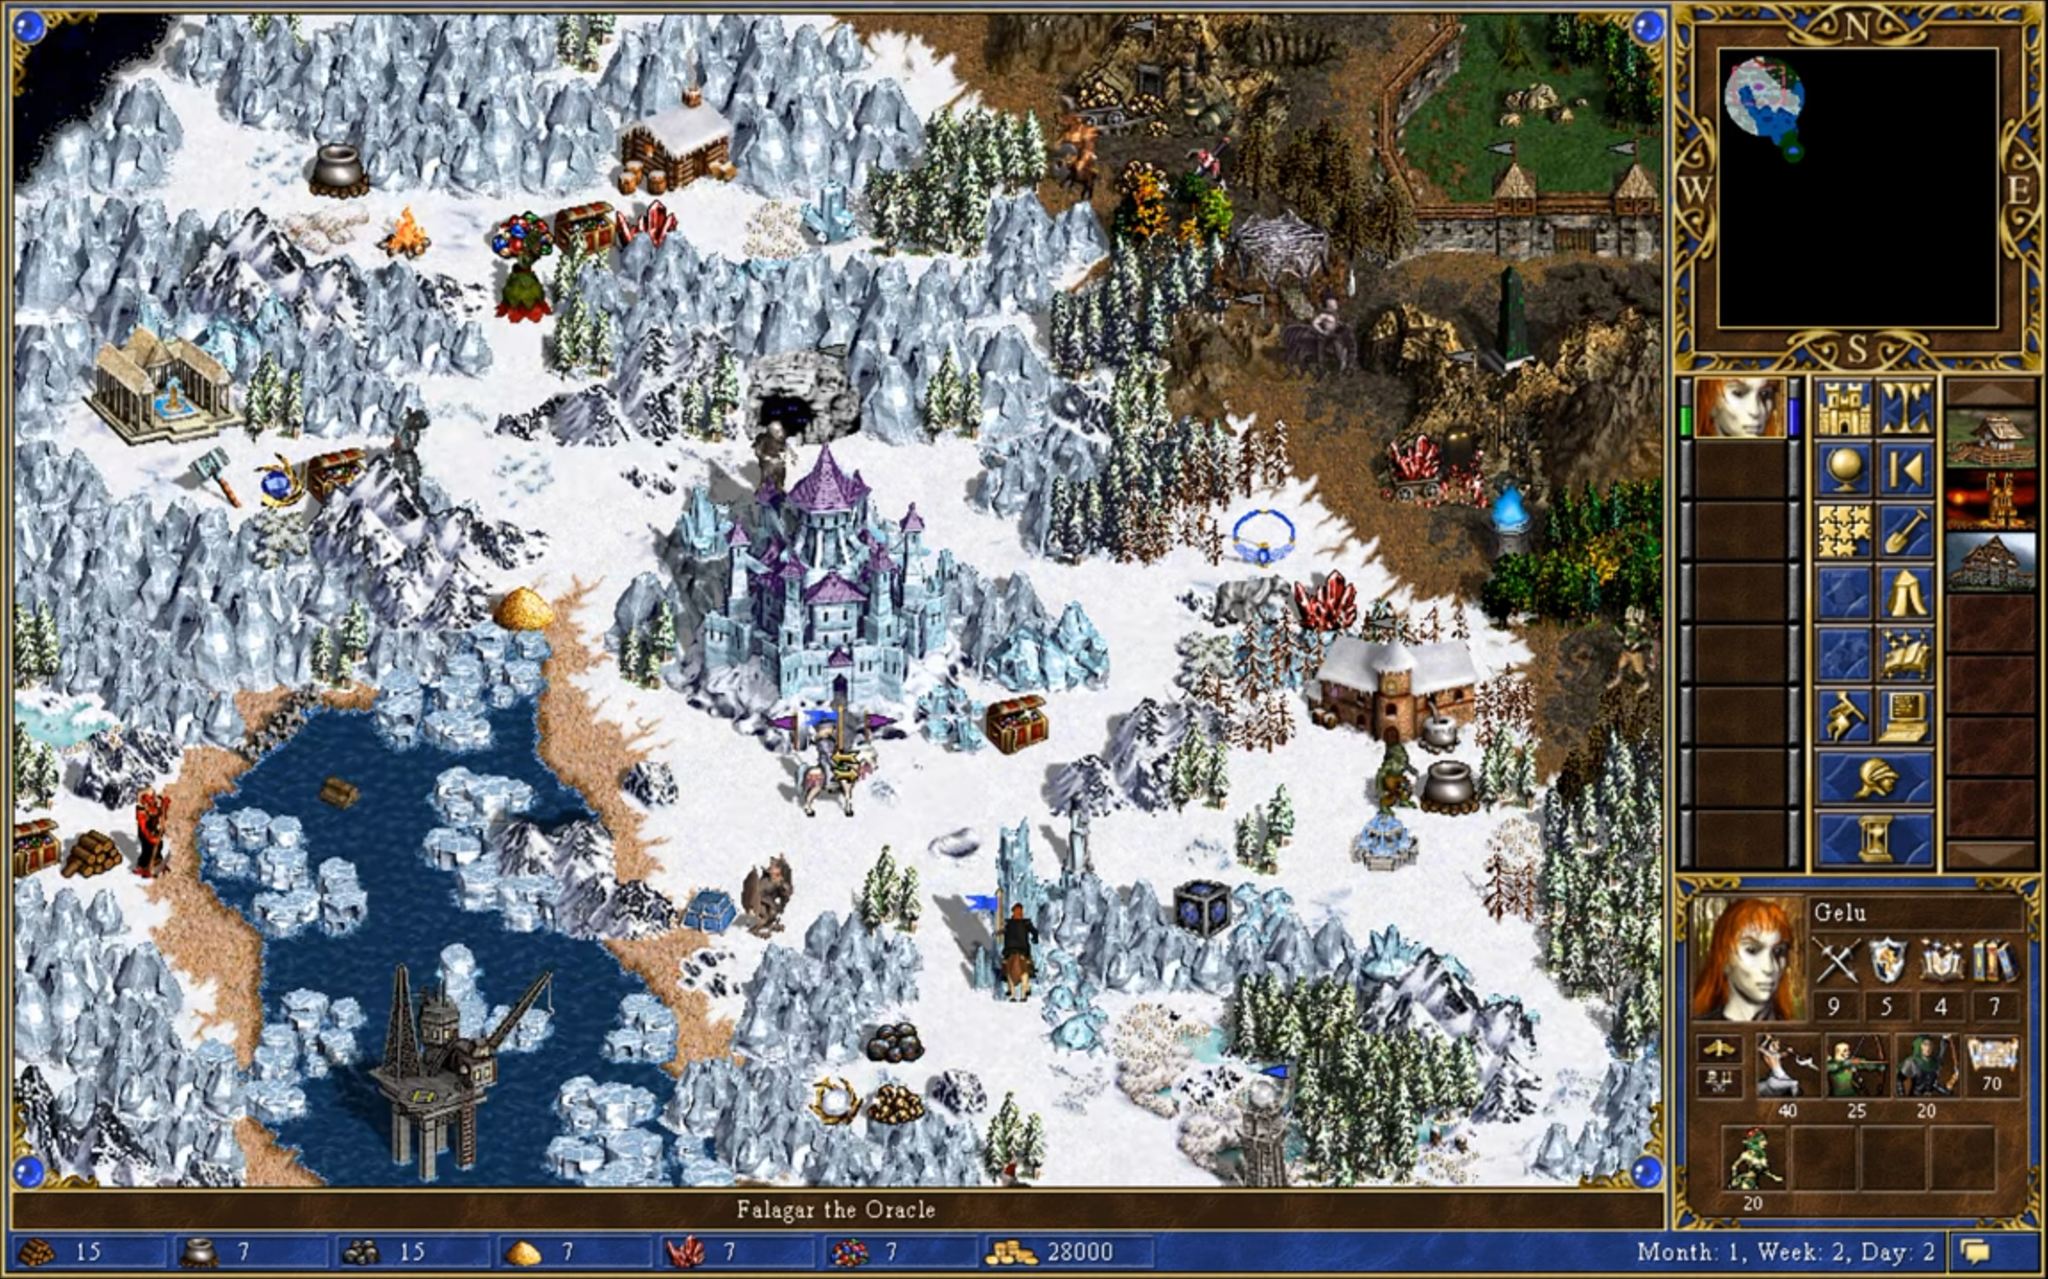 Heroes of Might and Magic III: Day of Reckoning